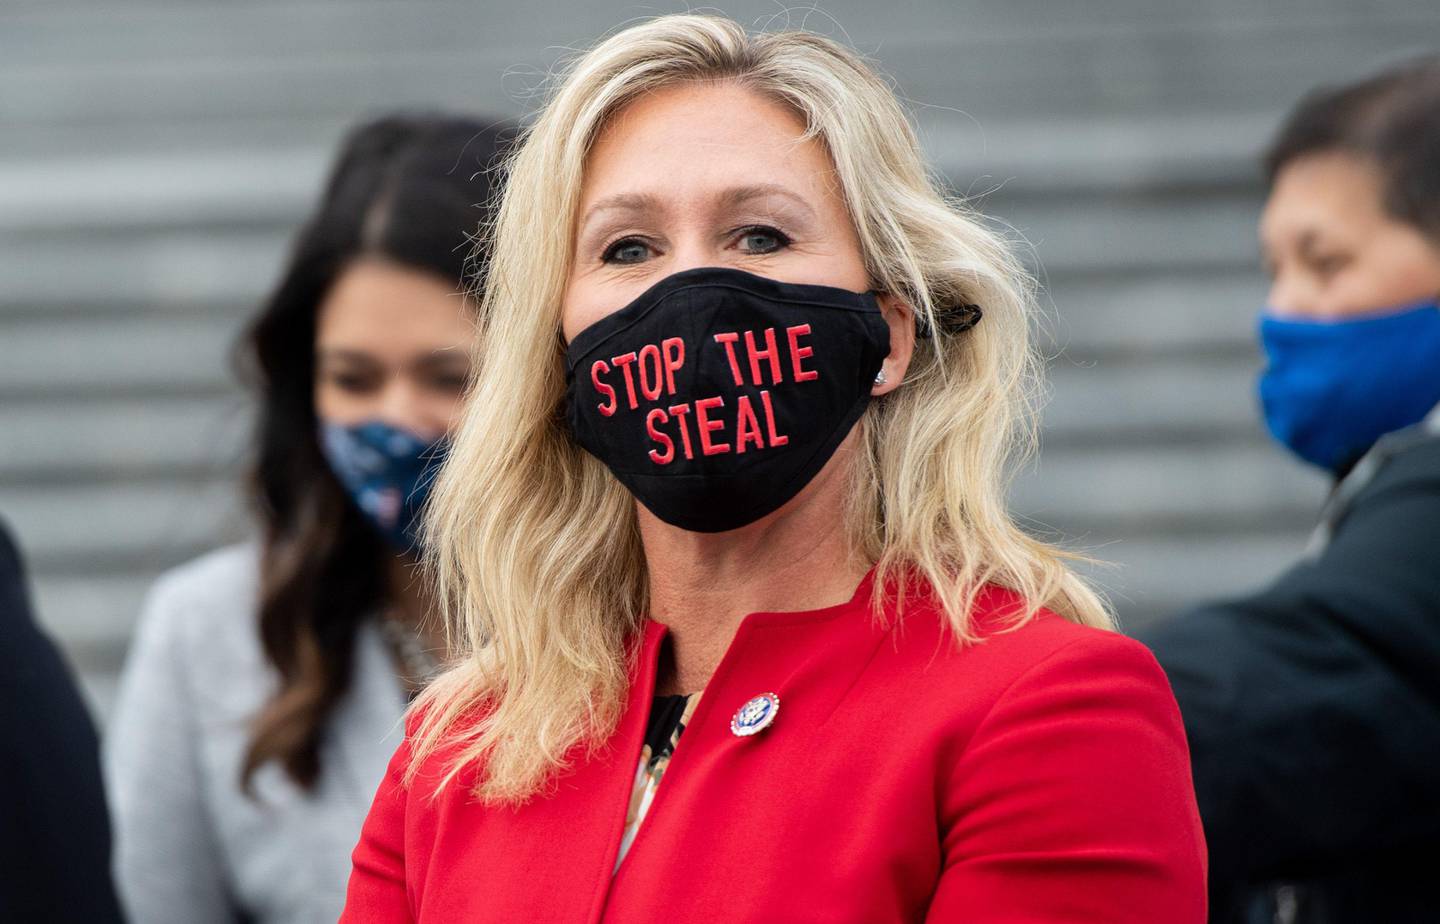 (FILES) In this file photo taken on January 4, 2021 US Representative Marjorie Taylor Greene, Republican of Georgia, holds up a "Stop the Steal" mask while speaking with fellow first-term Republican members of Congress on the steps of the US Capitol in Washington, DC. - A newly elected Republican congresswoman known for promoting QAnon conspiracy theories accused Twitter of censorship on January 17, 2021 after her account was temporarily suspended for "multiple violations". Marjorie Taylor Greene was hit with the 12-hour suspension after she tweeted claims of alleged election fraud in Georgia, her home state. (Photo by SAUL LOEB / AFP)